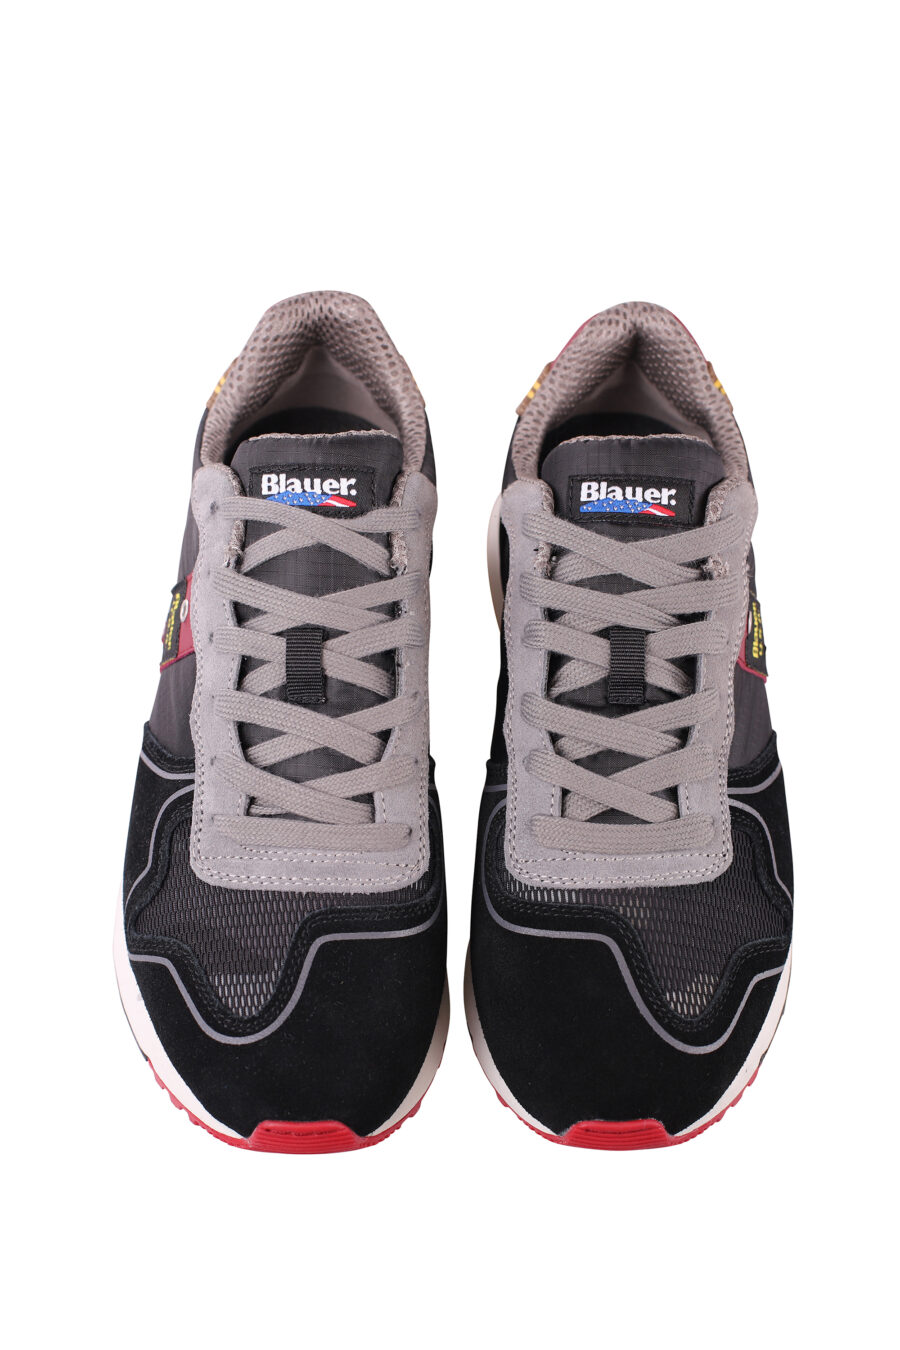 Trainers "quartz" black multicoloured with breathable mesh - IMG 6657